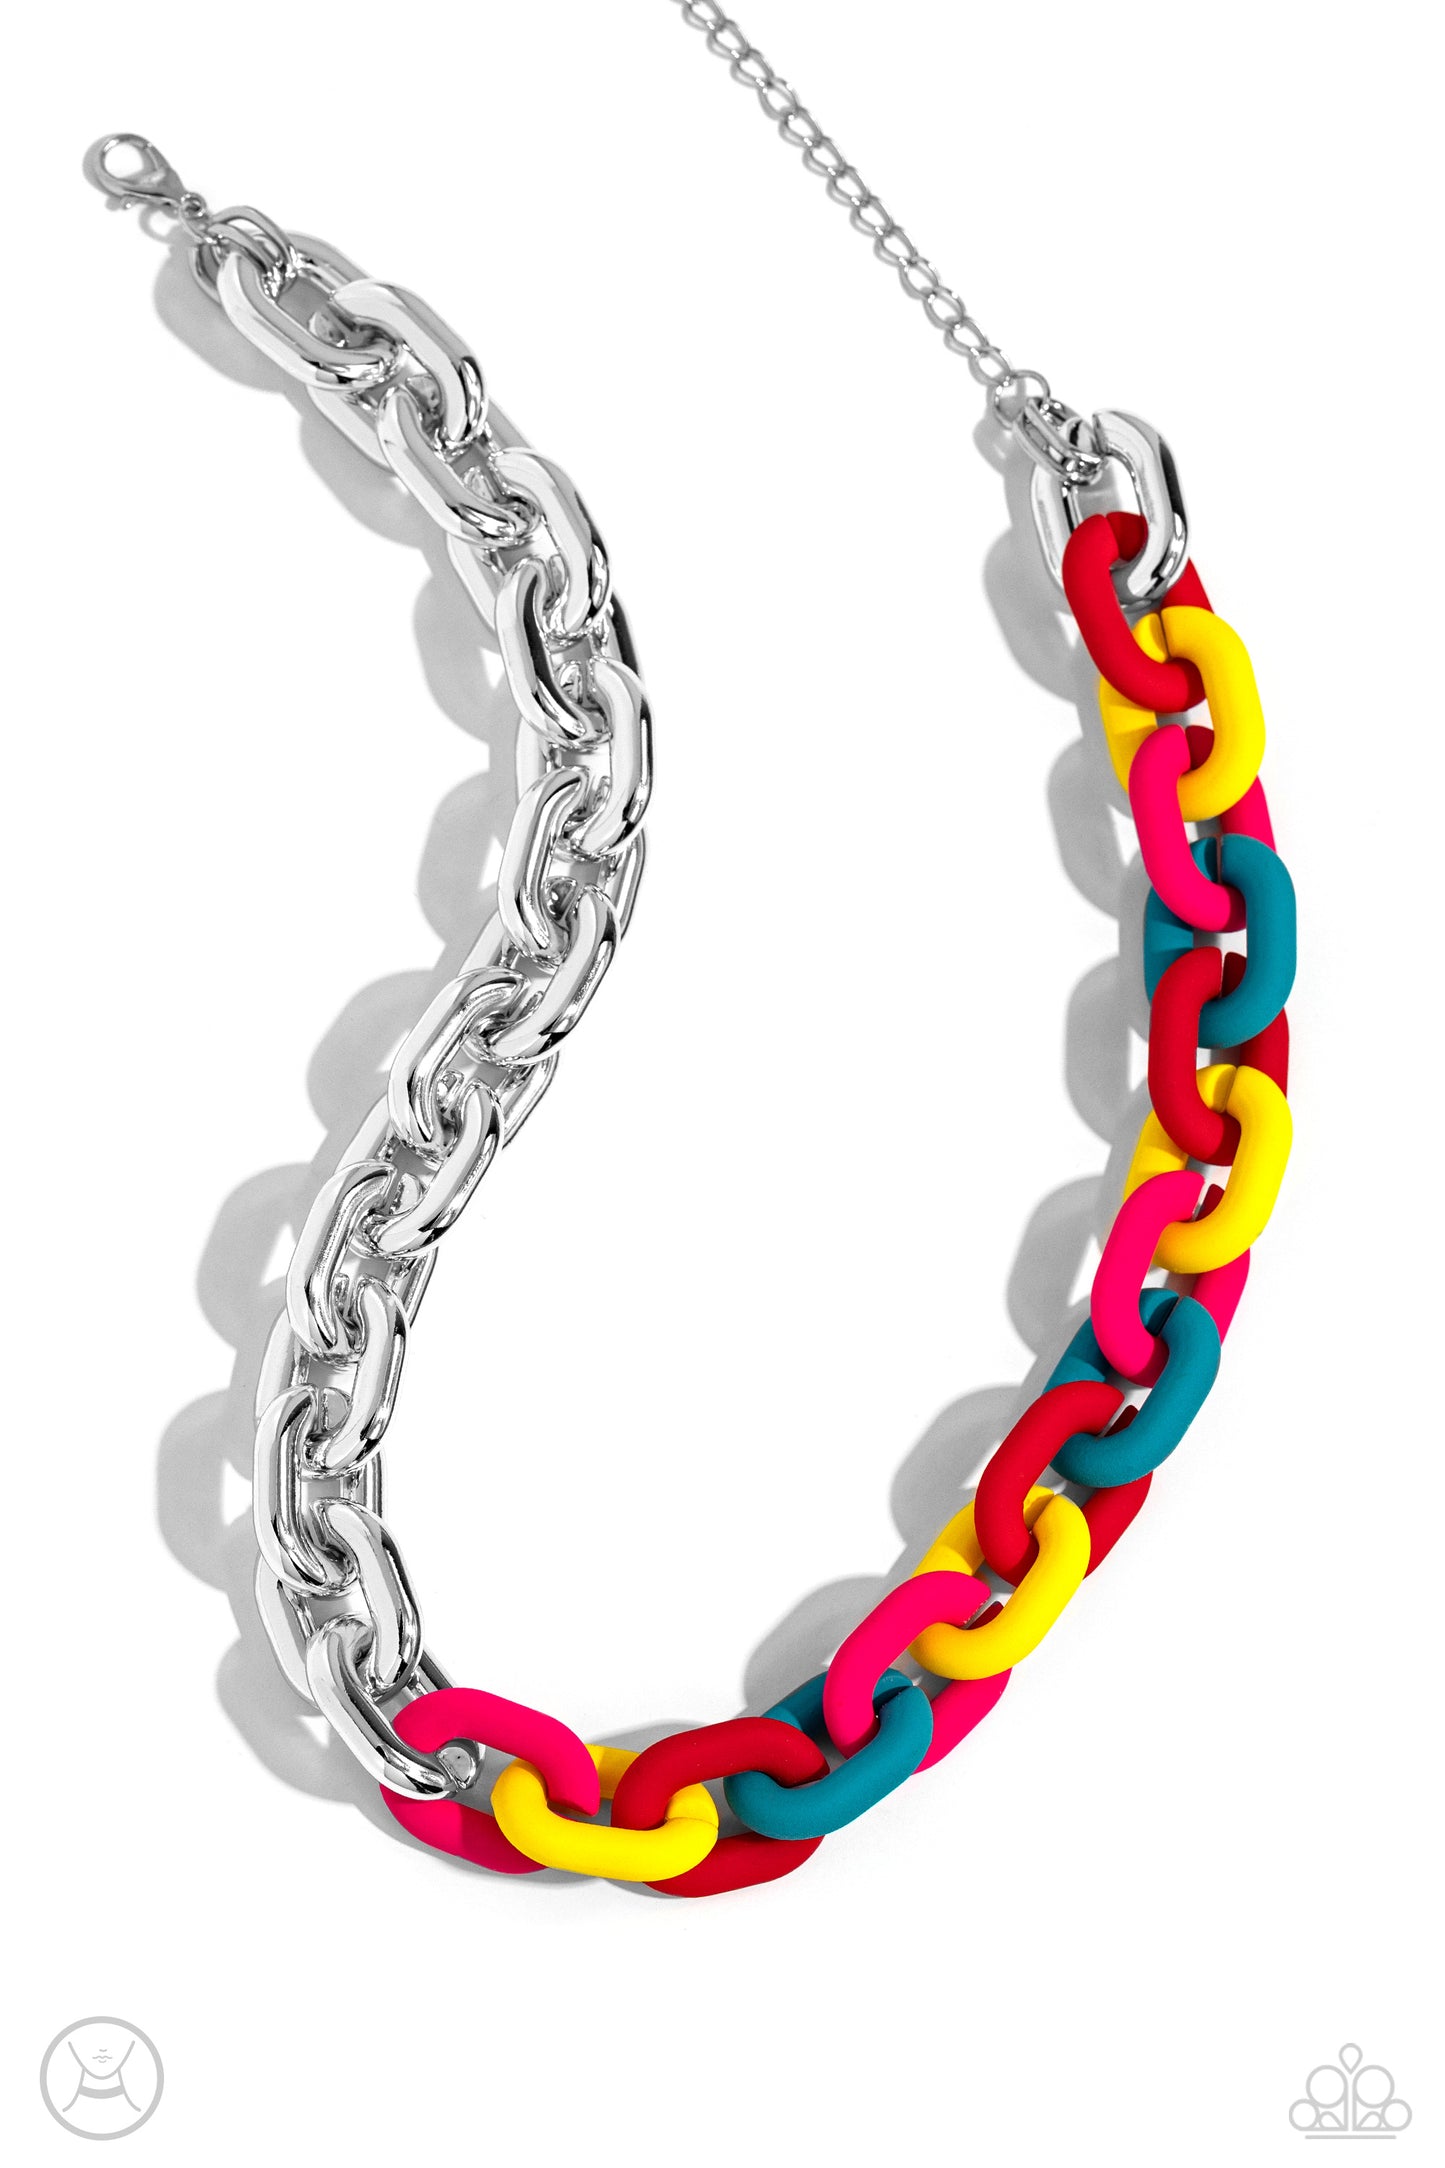 Contrasting Couture Red Necklace - Paparazzi Accessories  A strand of oversized silver curb chain collides with red, High Visibility, turquoise, and Pink Peacock acrylic curb links to create an abstract blend of grit and color. The oversized links of the colored curb chain offset the high sheen of the silver that lays on the opposite side, perfectly balancing the contrasting design. Features an adjustable clasp closure.  Sold as one individual choker necklace. Includes one pair of matching earrings.